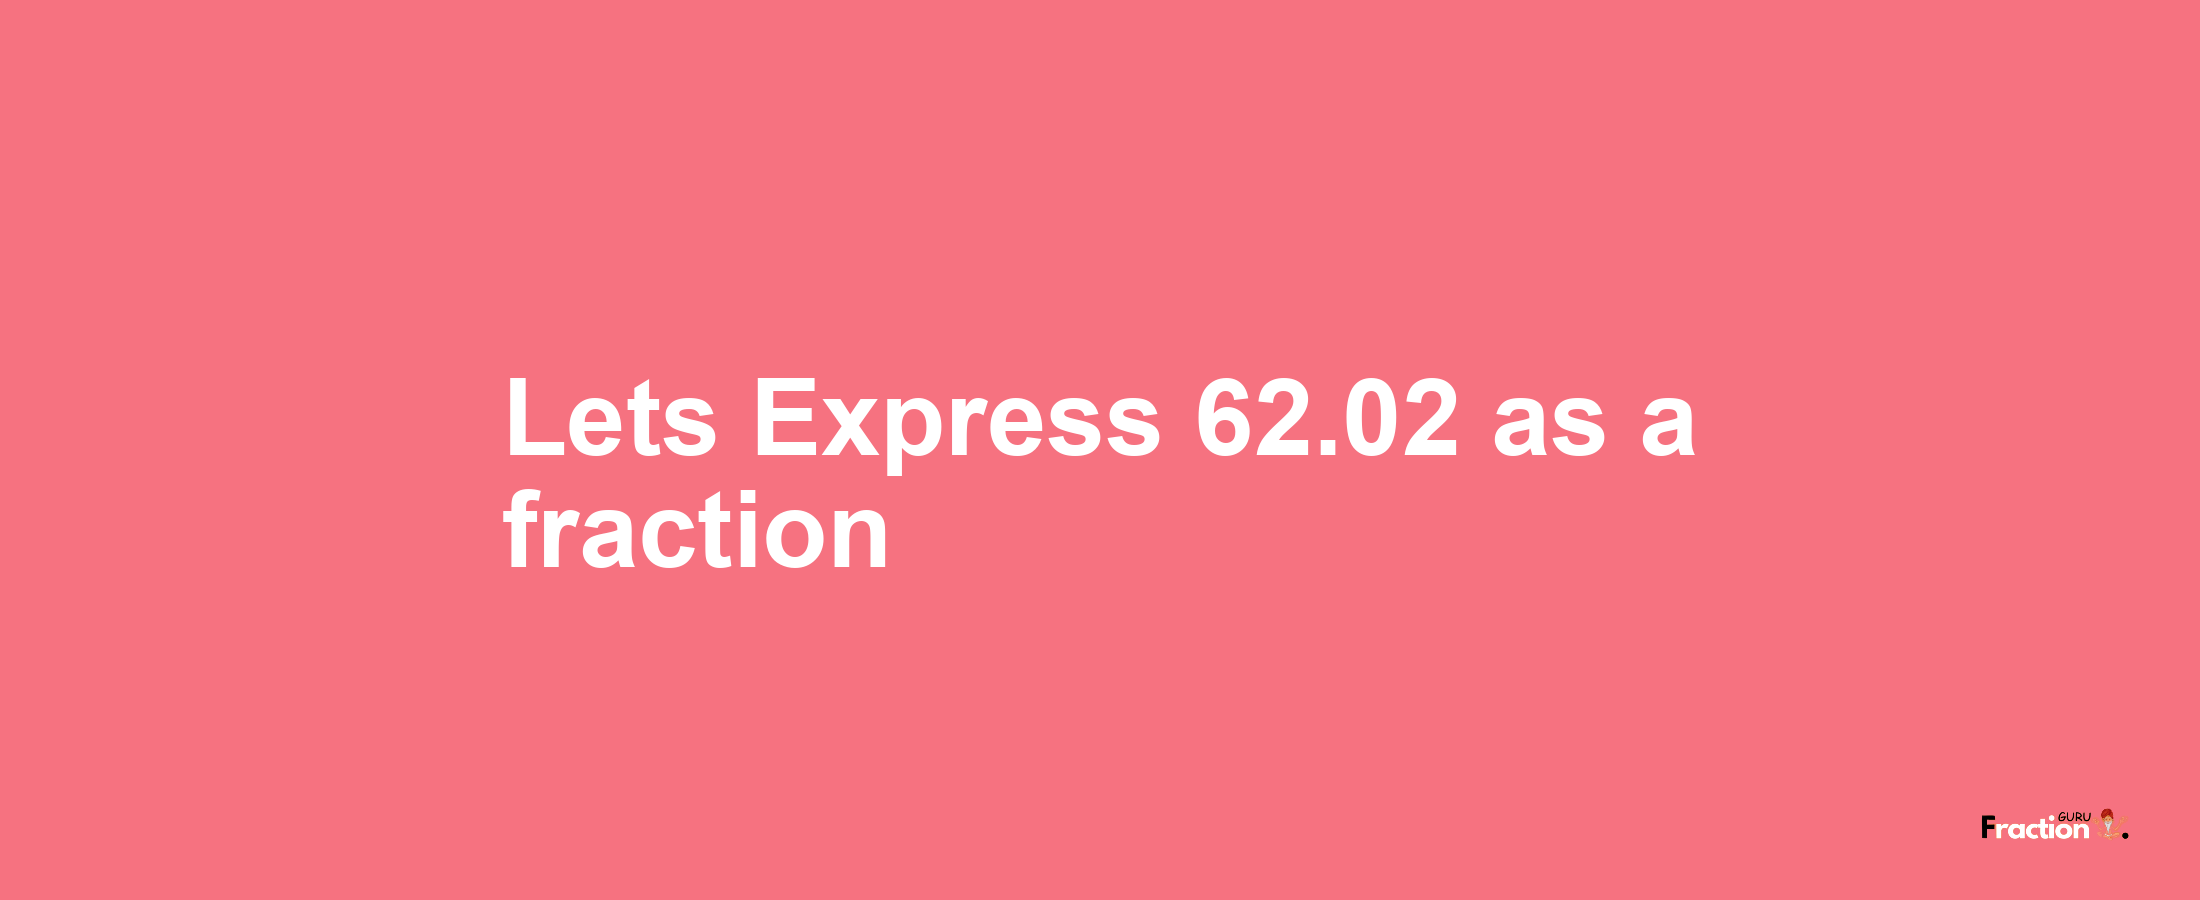 Lets Express 62.02 as afraction